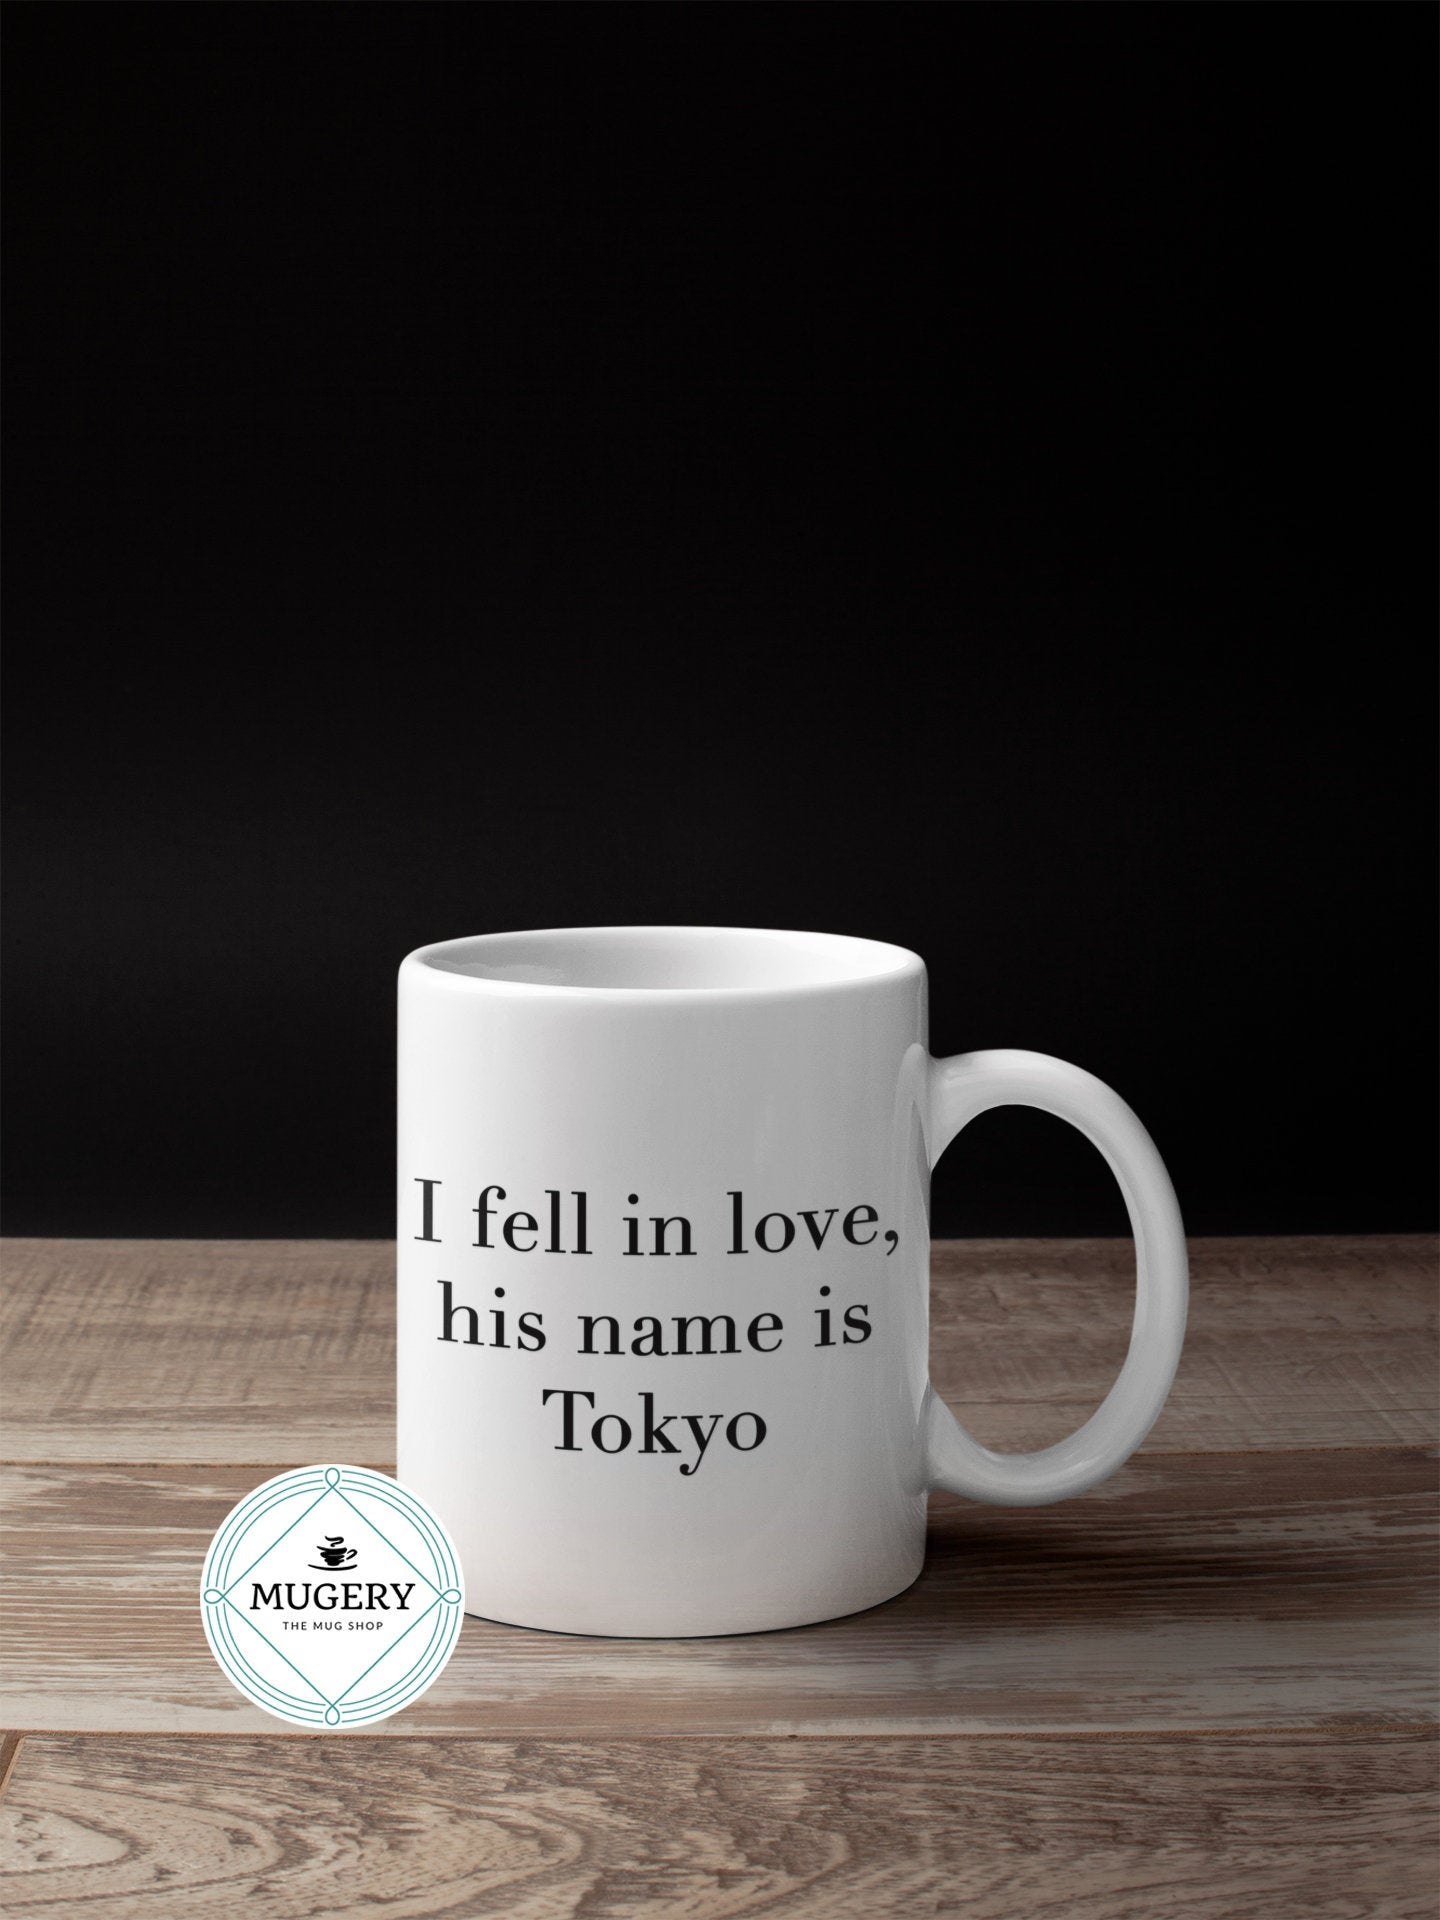 I fell in love, his name is Tokyo Mug - Guestbookery